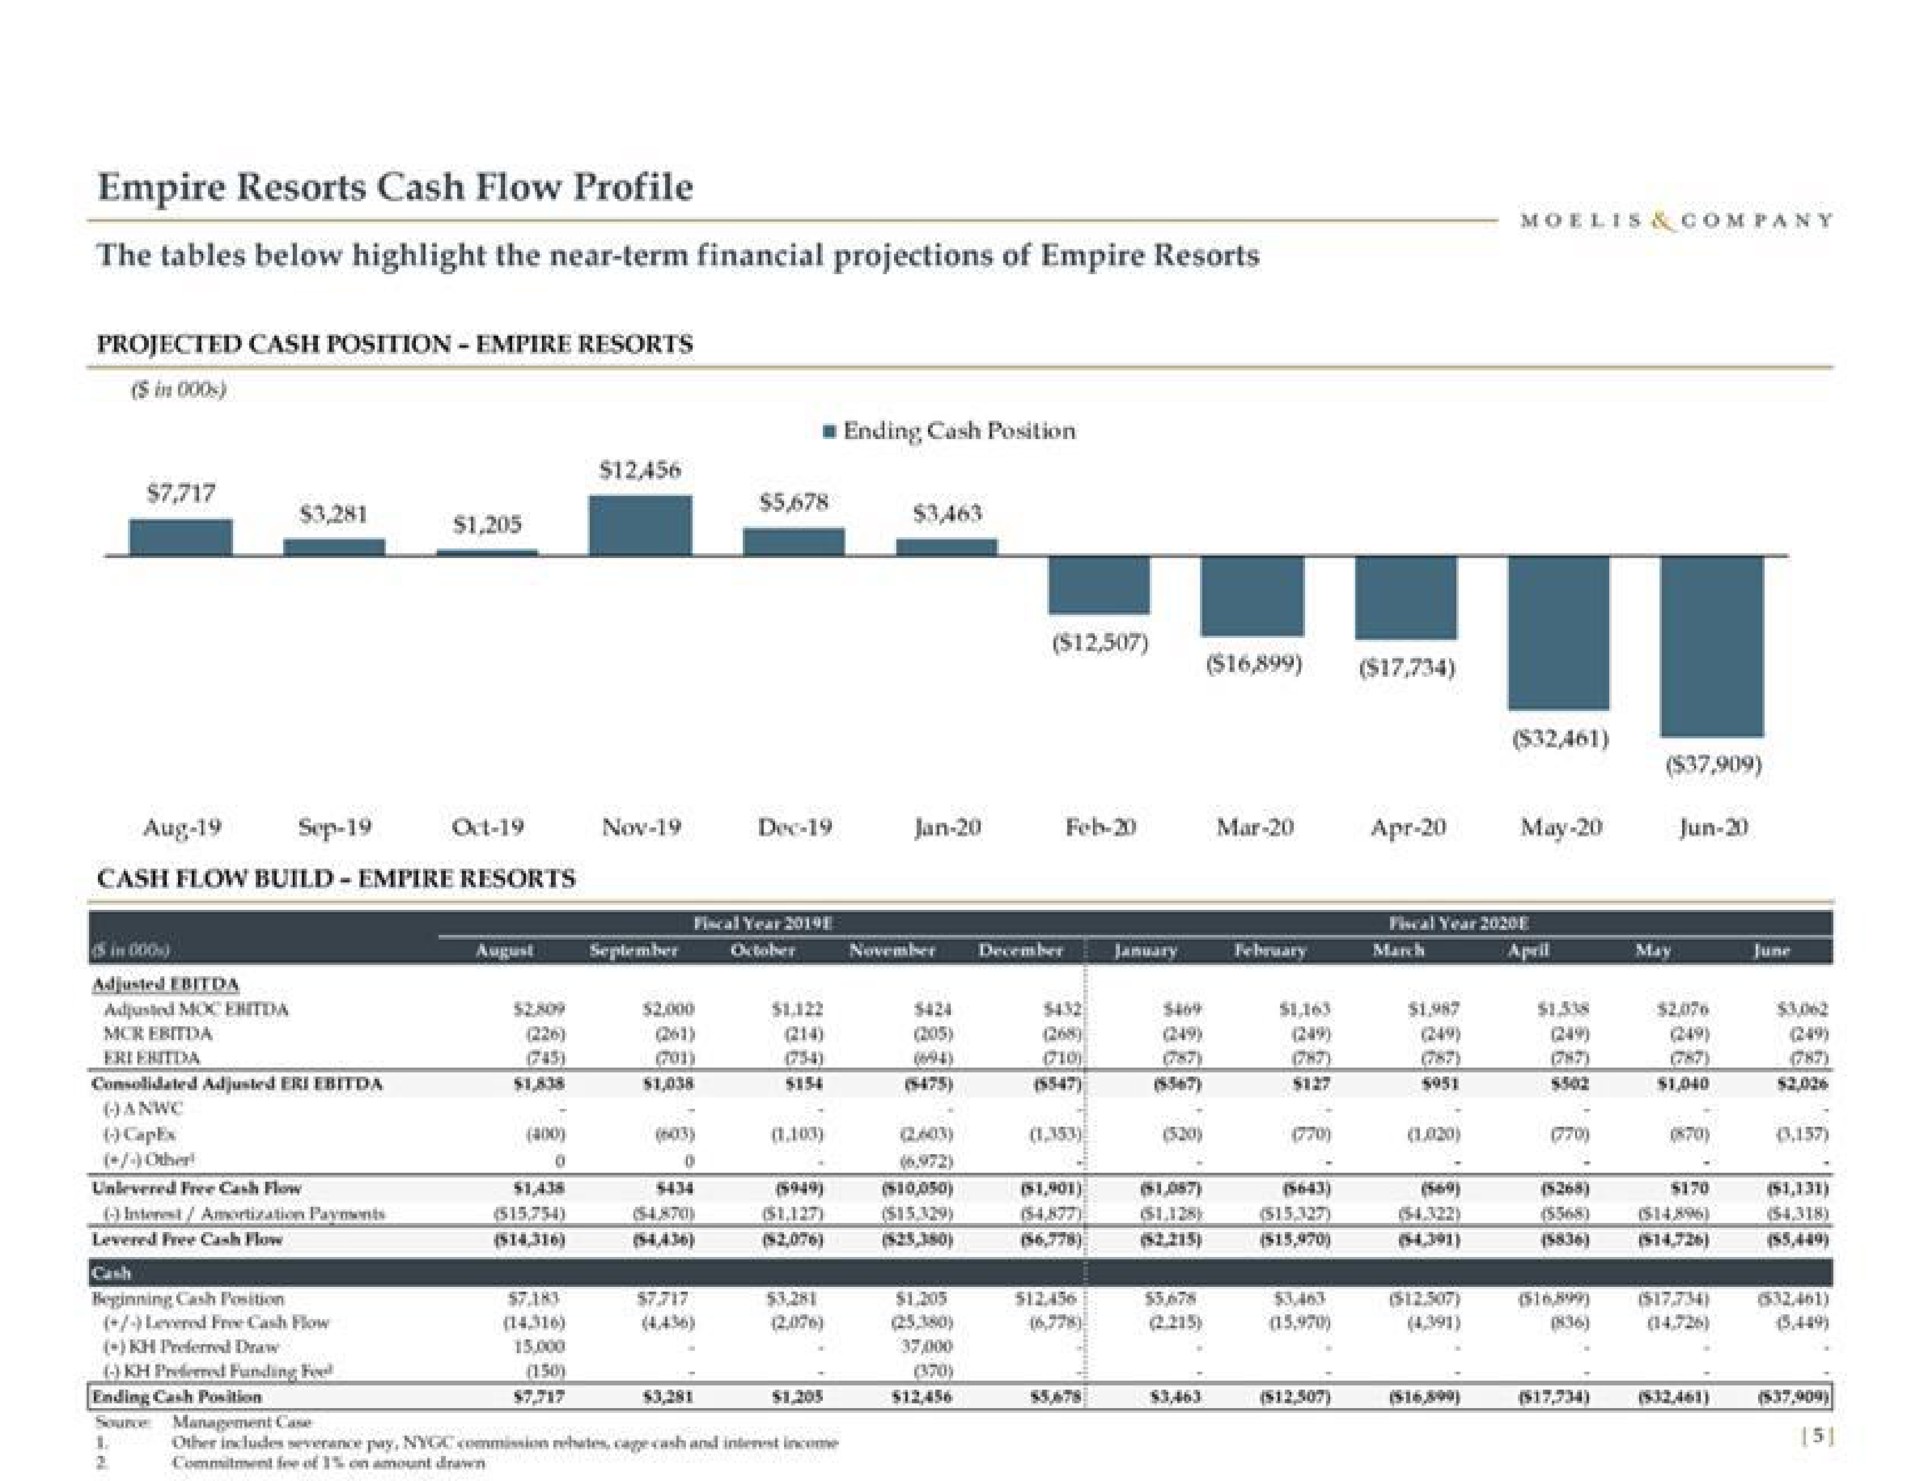 empire resorts cash flow profile the tables below highlight the near term financial projections of empire resorts adjusted | Moelis & Company